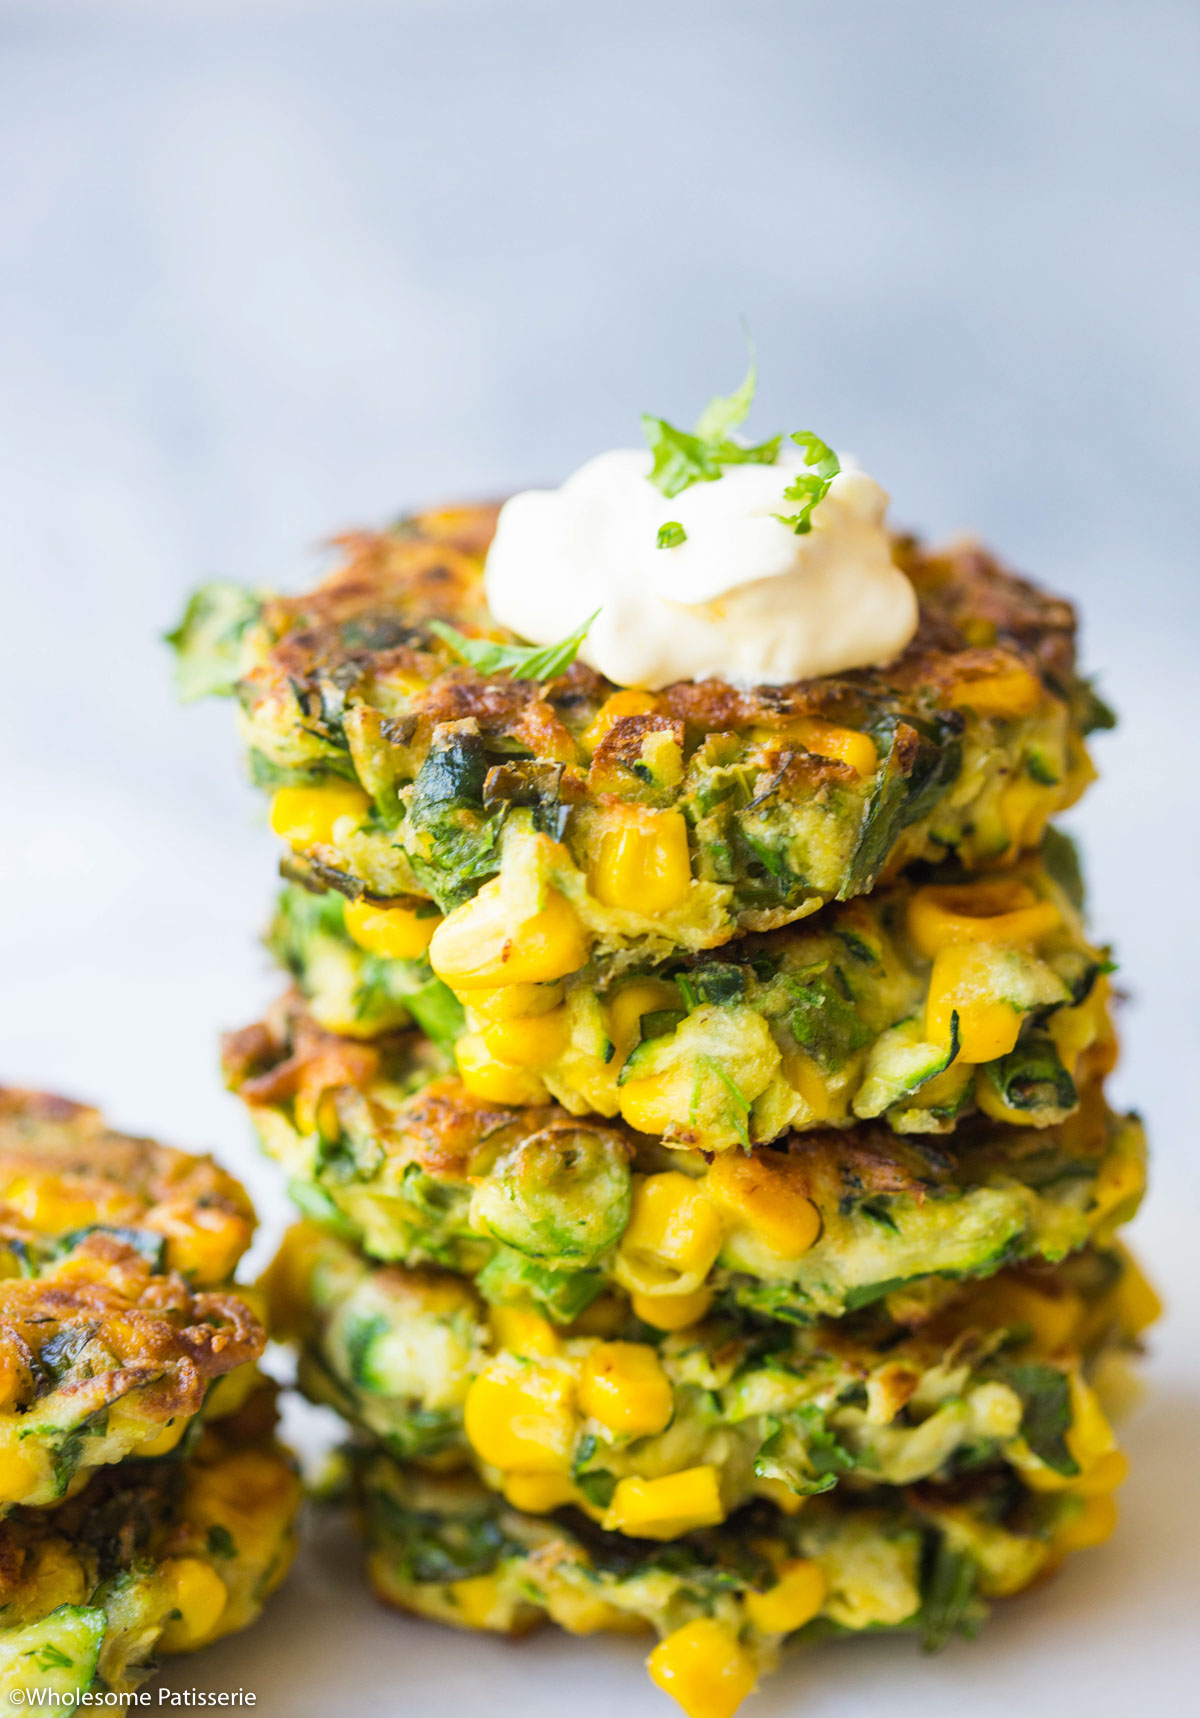 A stack of the fritters with a dollop of sour cream and fresh parsley on top.